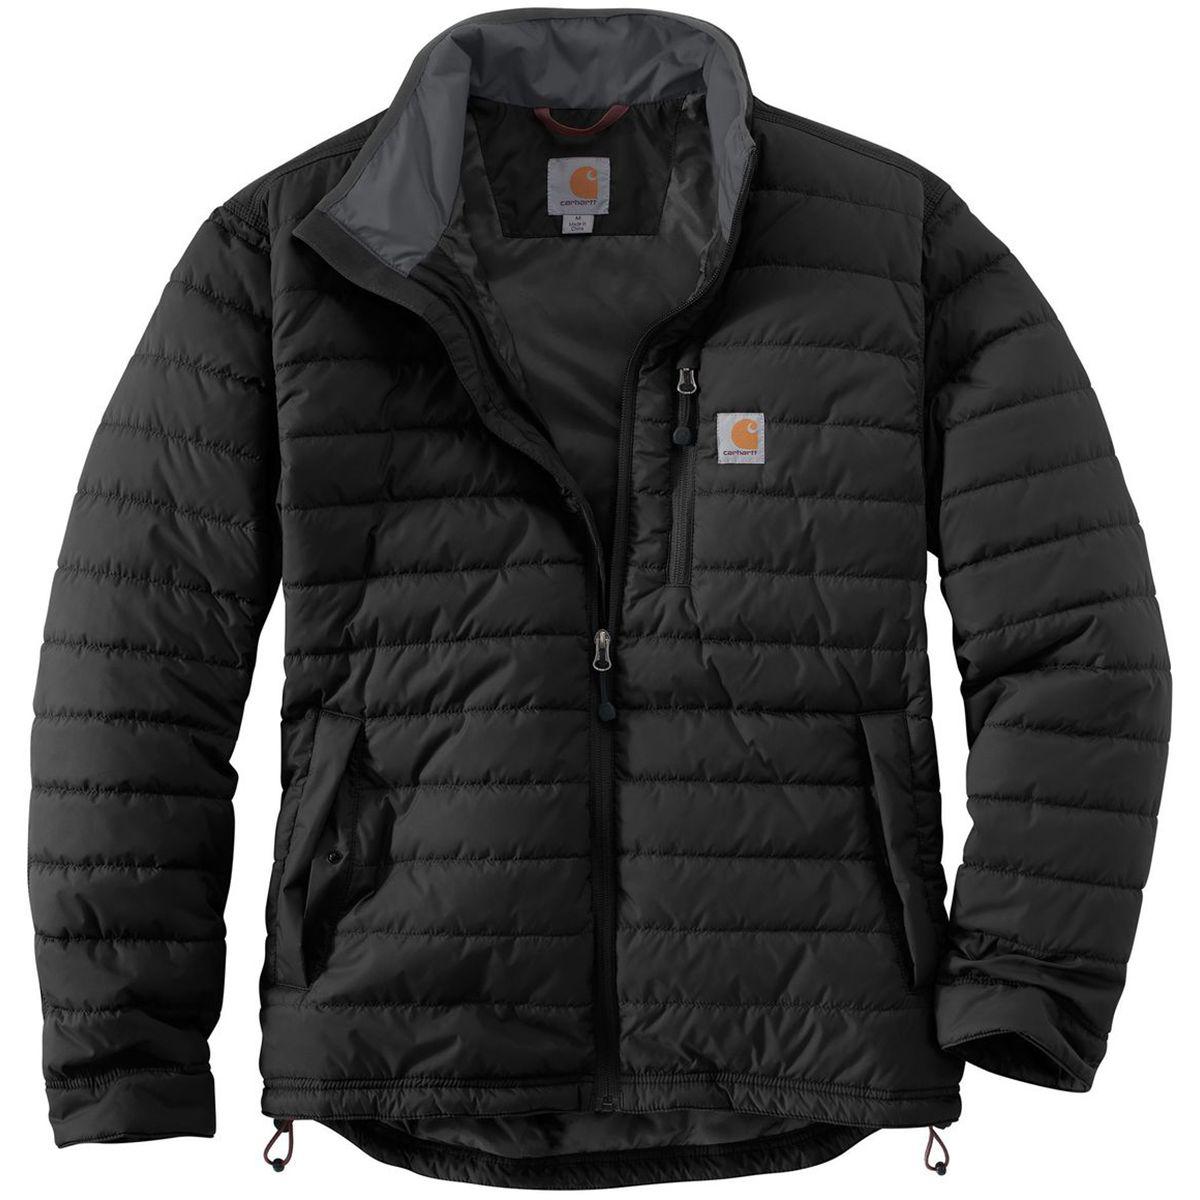 Carhartt Synthetic Gilliam Insulated Jacket in Black for Men - Lyst